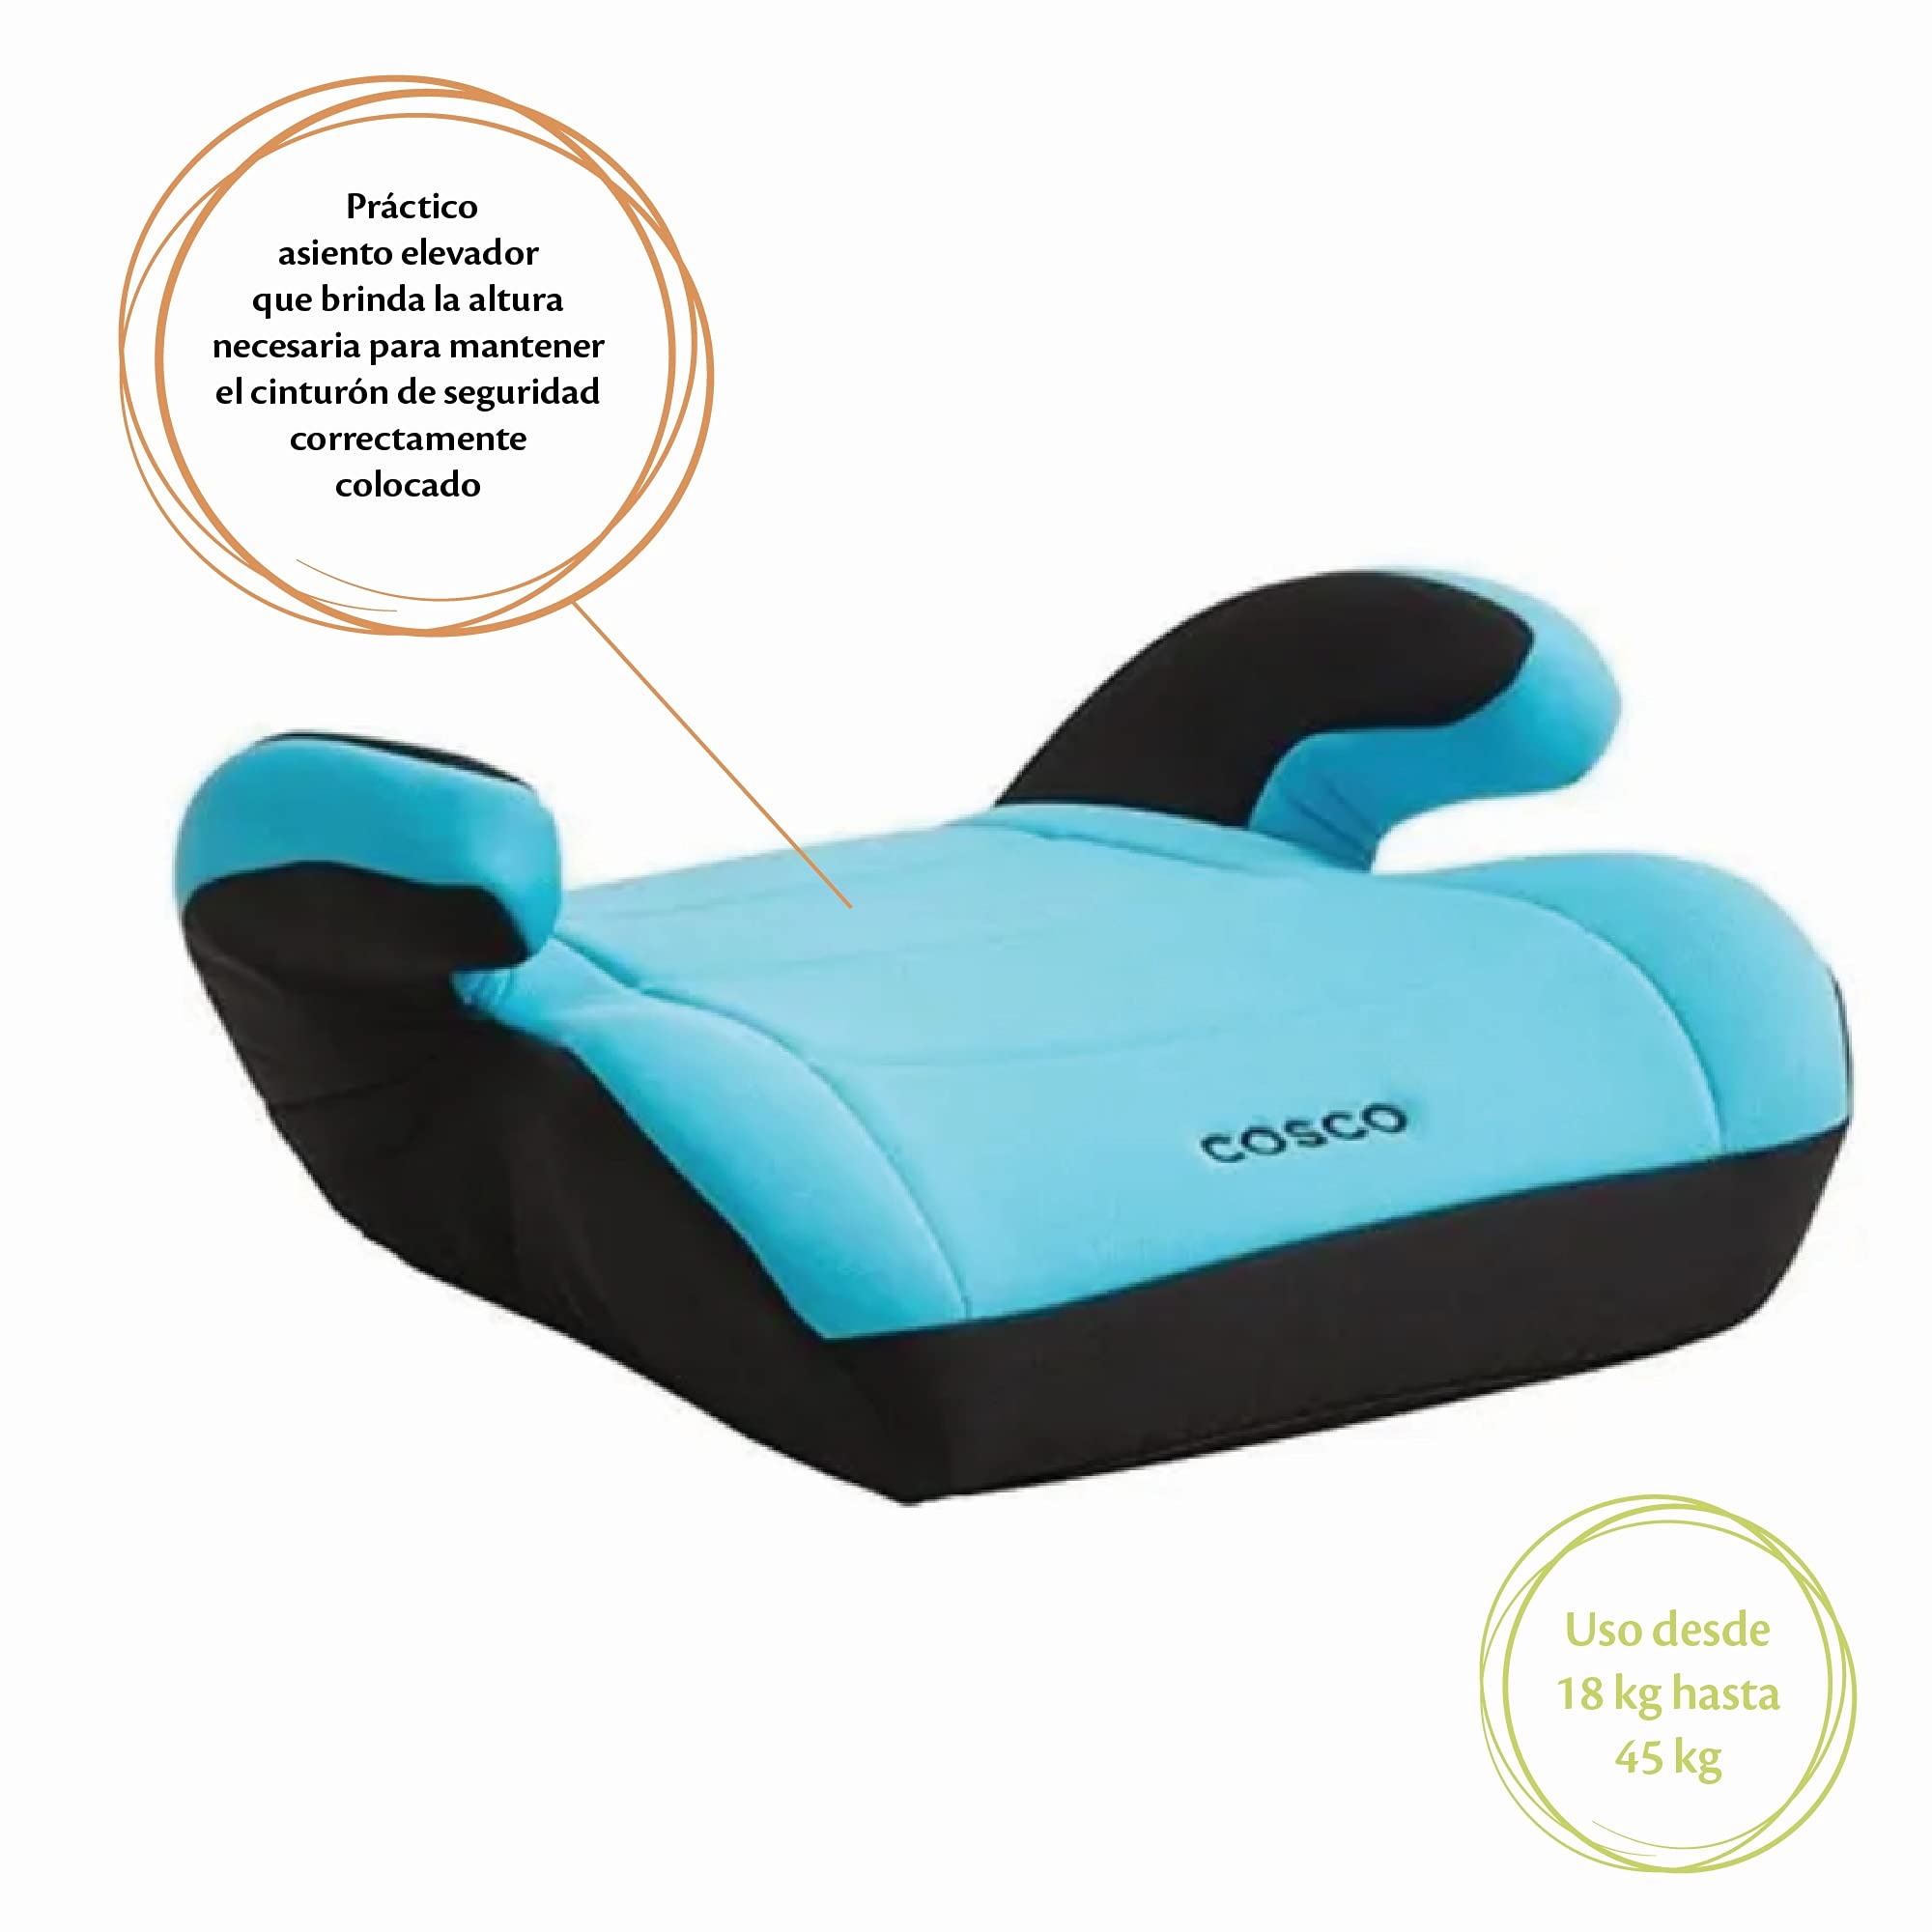 Cosco Topside Booster Car Seat - Easy to Move, Lightweight Design (Turquoise)